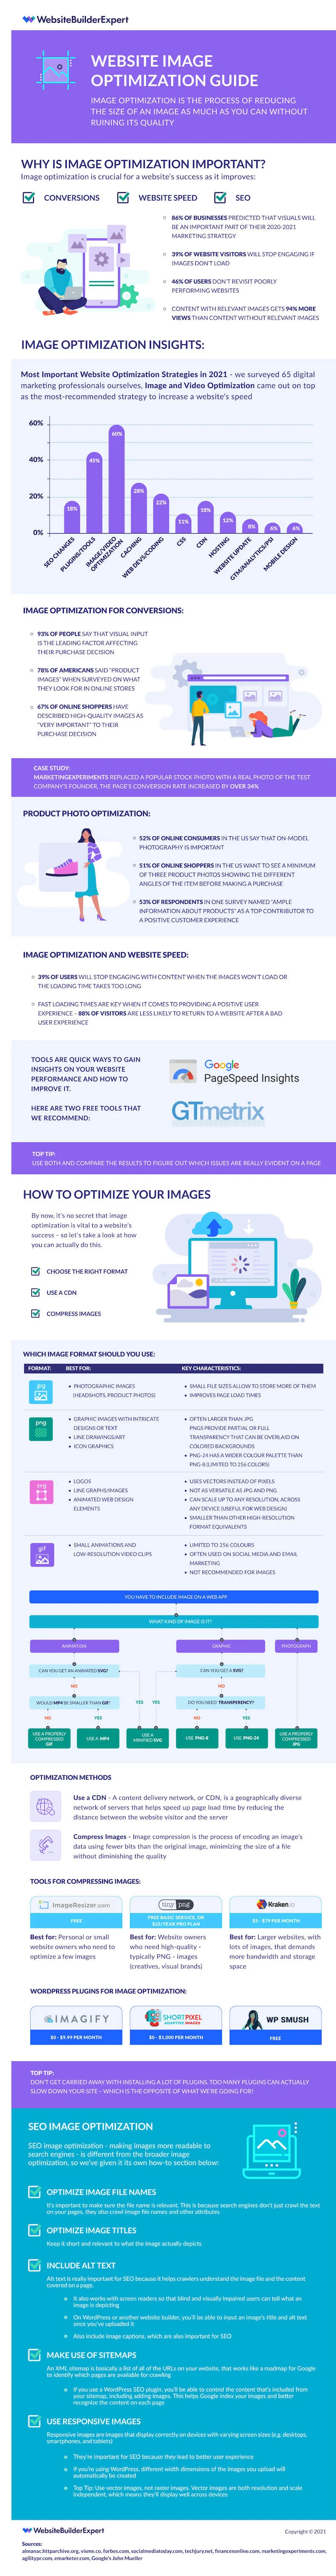 Infographic Website Image Optimization Guide